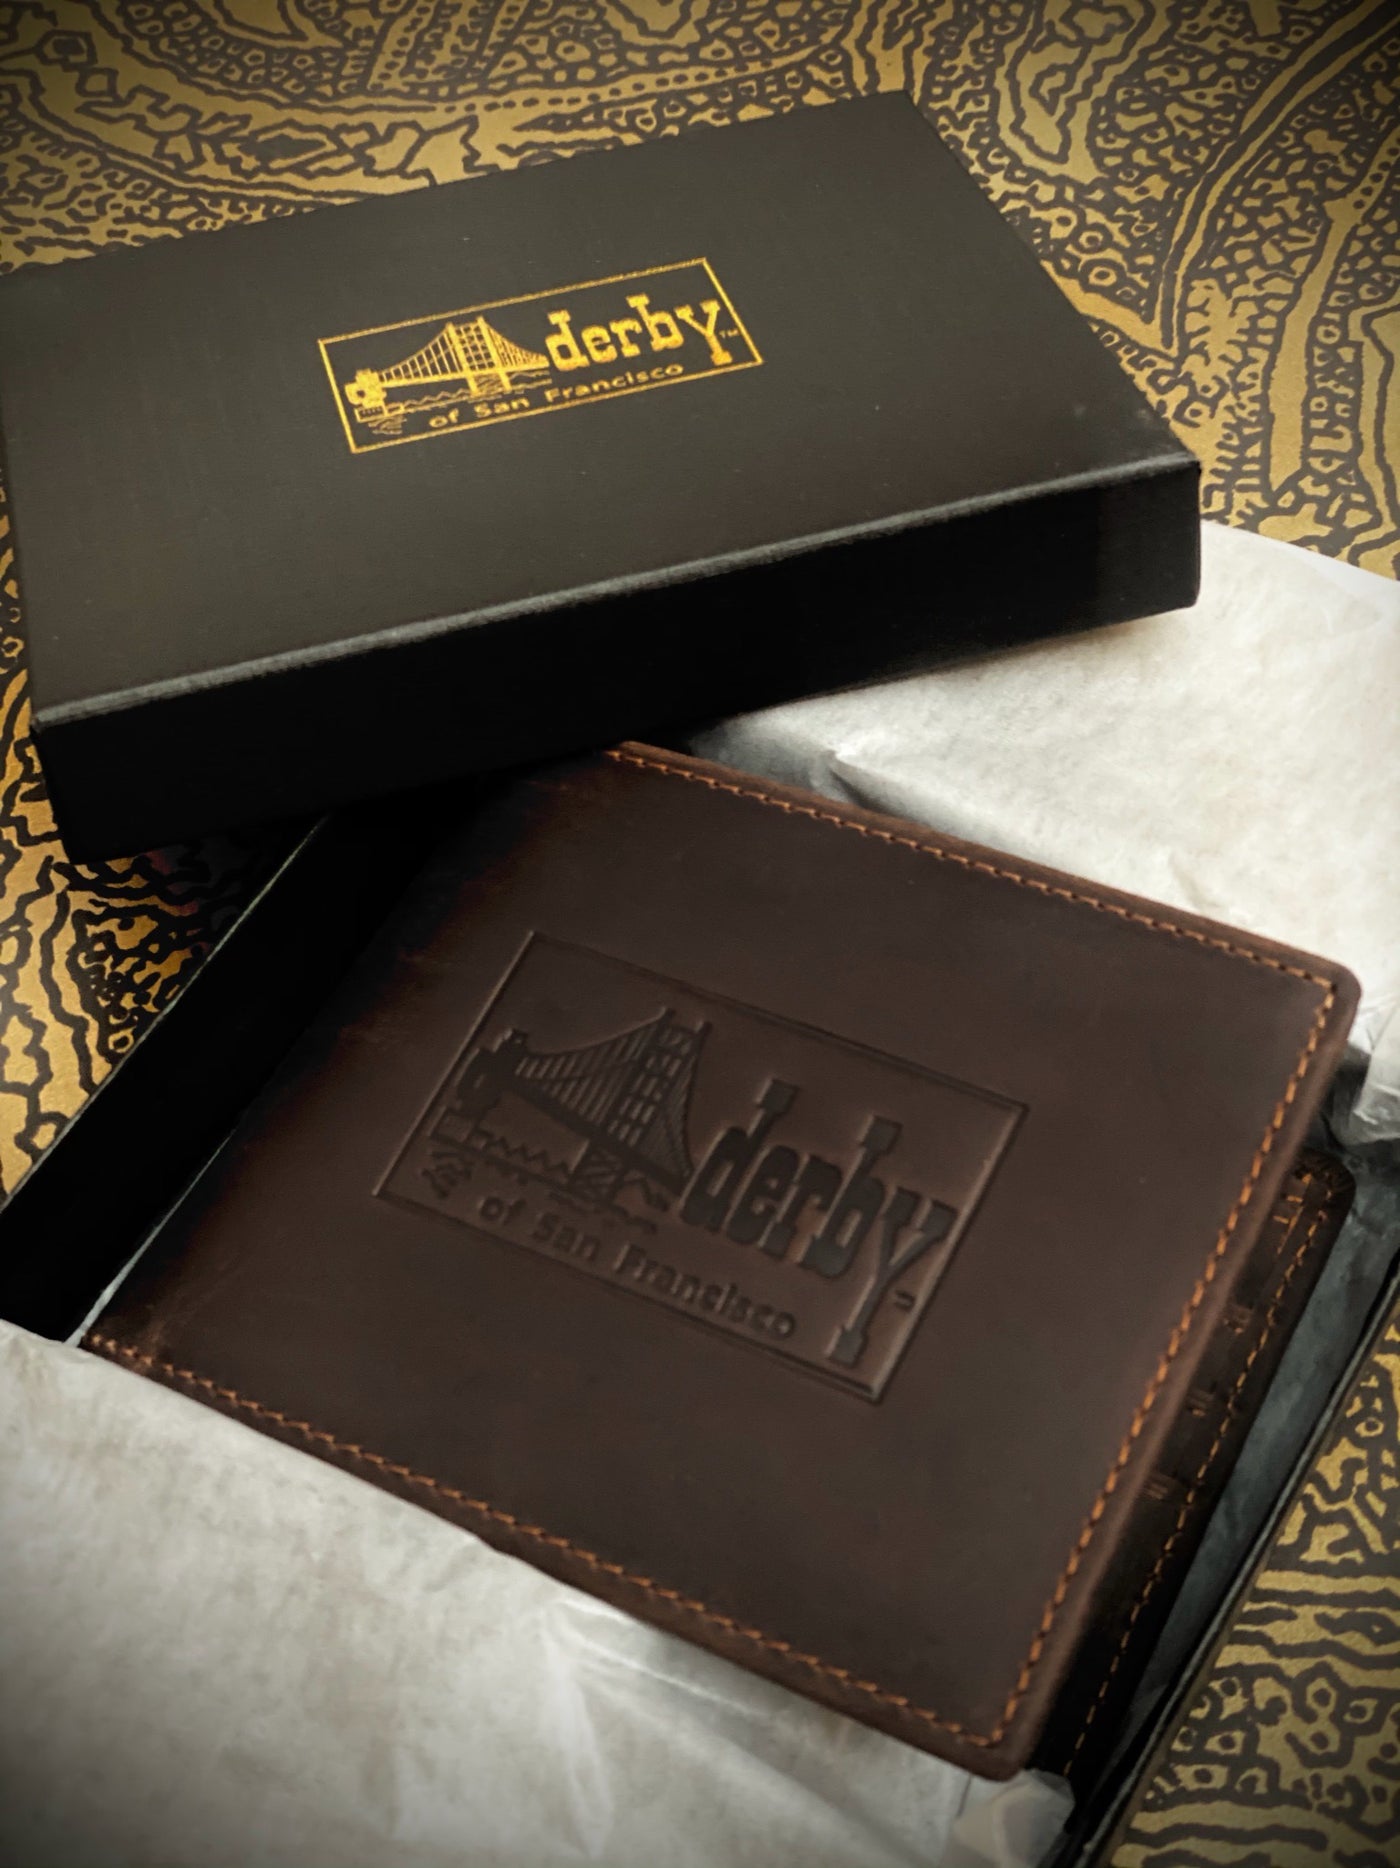 Brown leather Derby embossed logo wallet in box with gold logo